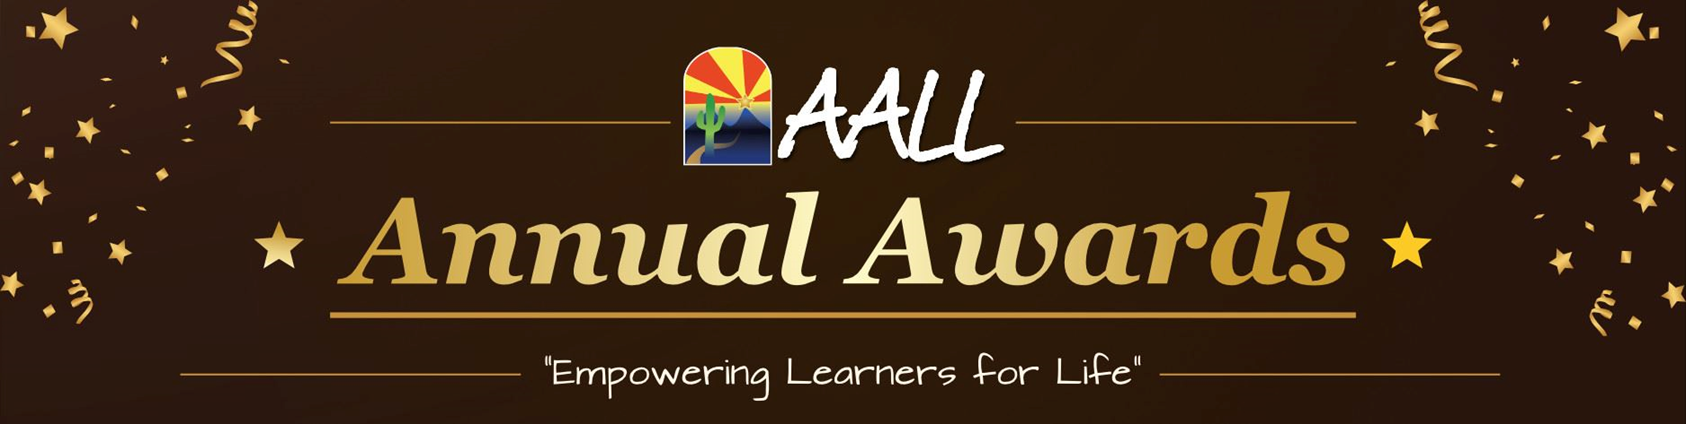 AALL logo with text Annual Awards then subtext Empowering Learners for Life.